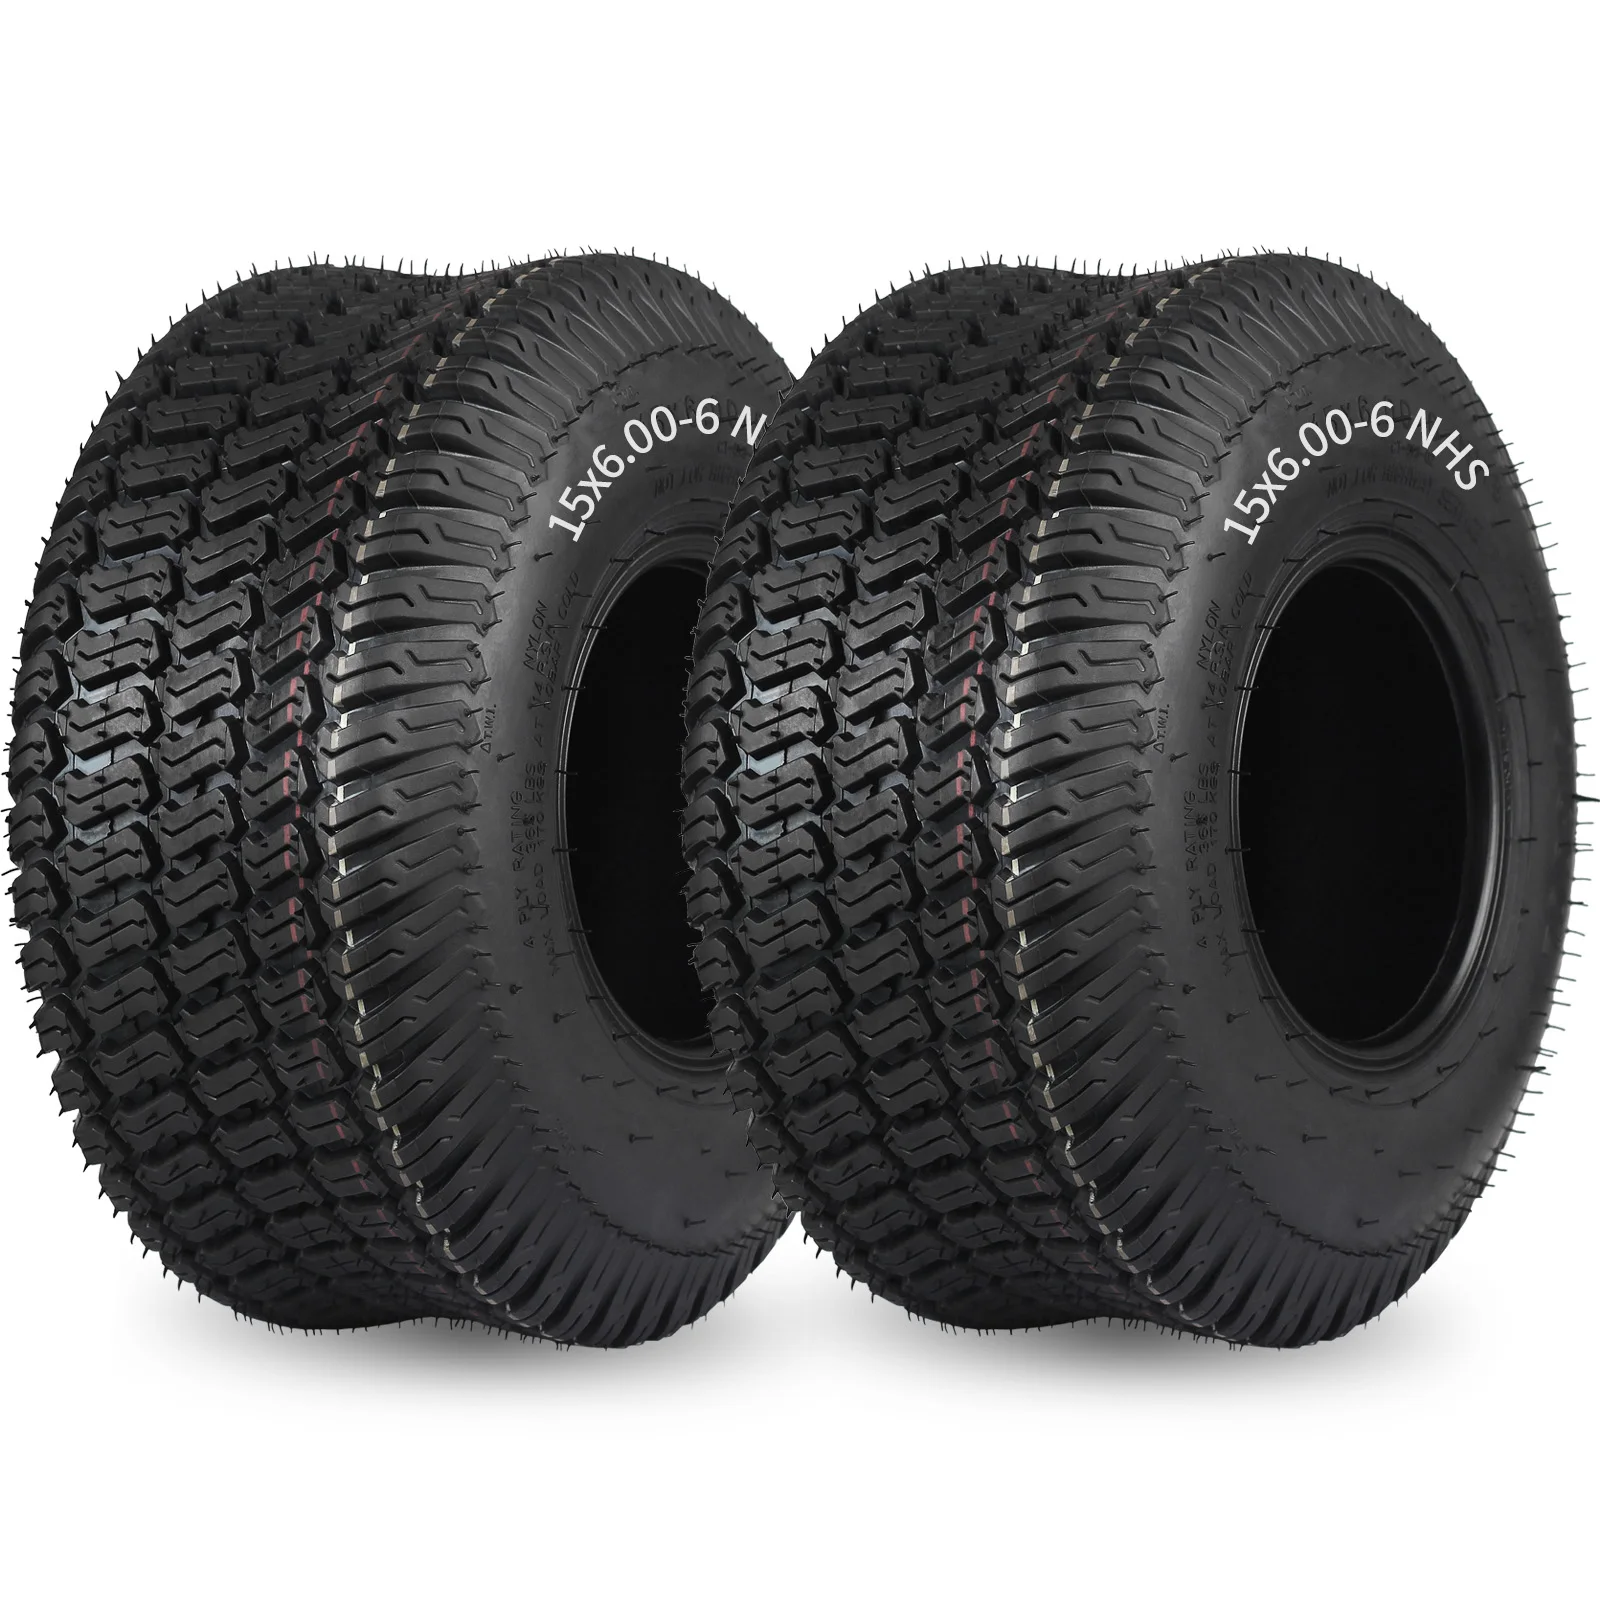 15 x 6.00-6 Turf-S Pattern Lawn Mower Tubeless Tire, 15x6-6 Tubeless Tire and Wheel for Tractor Riding Lawnmowers